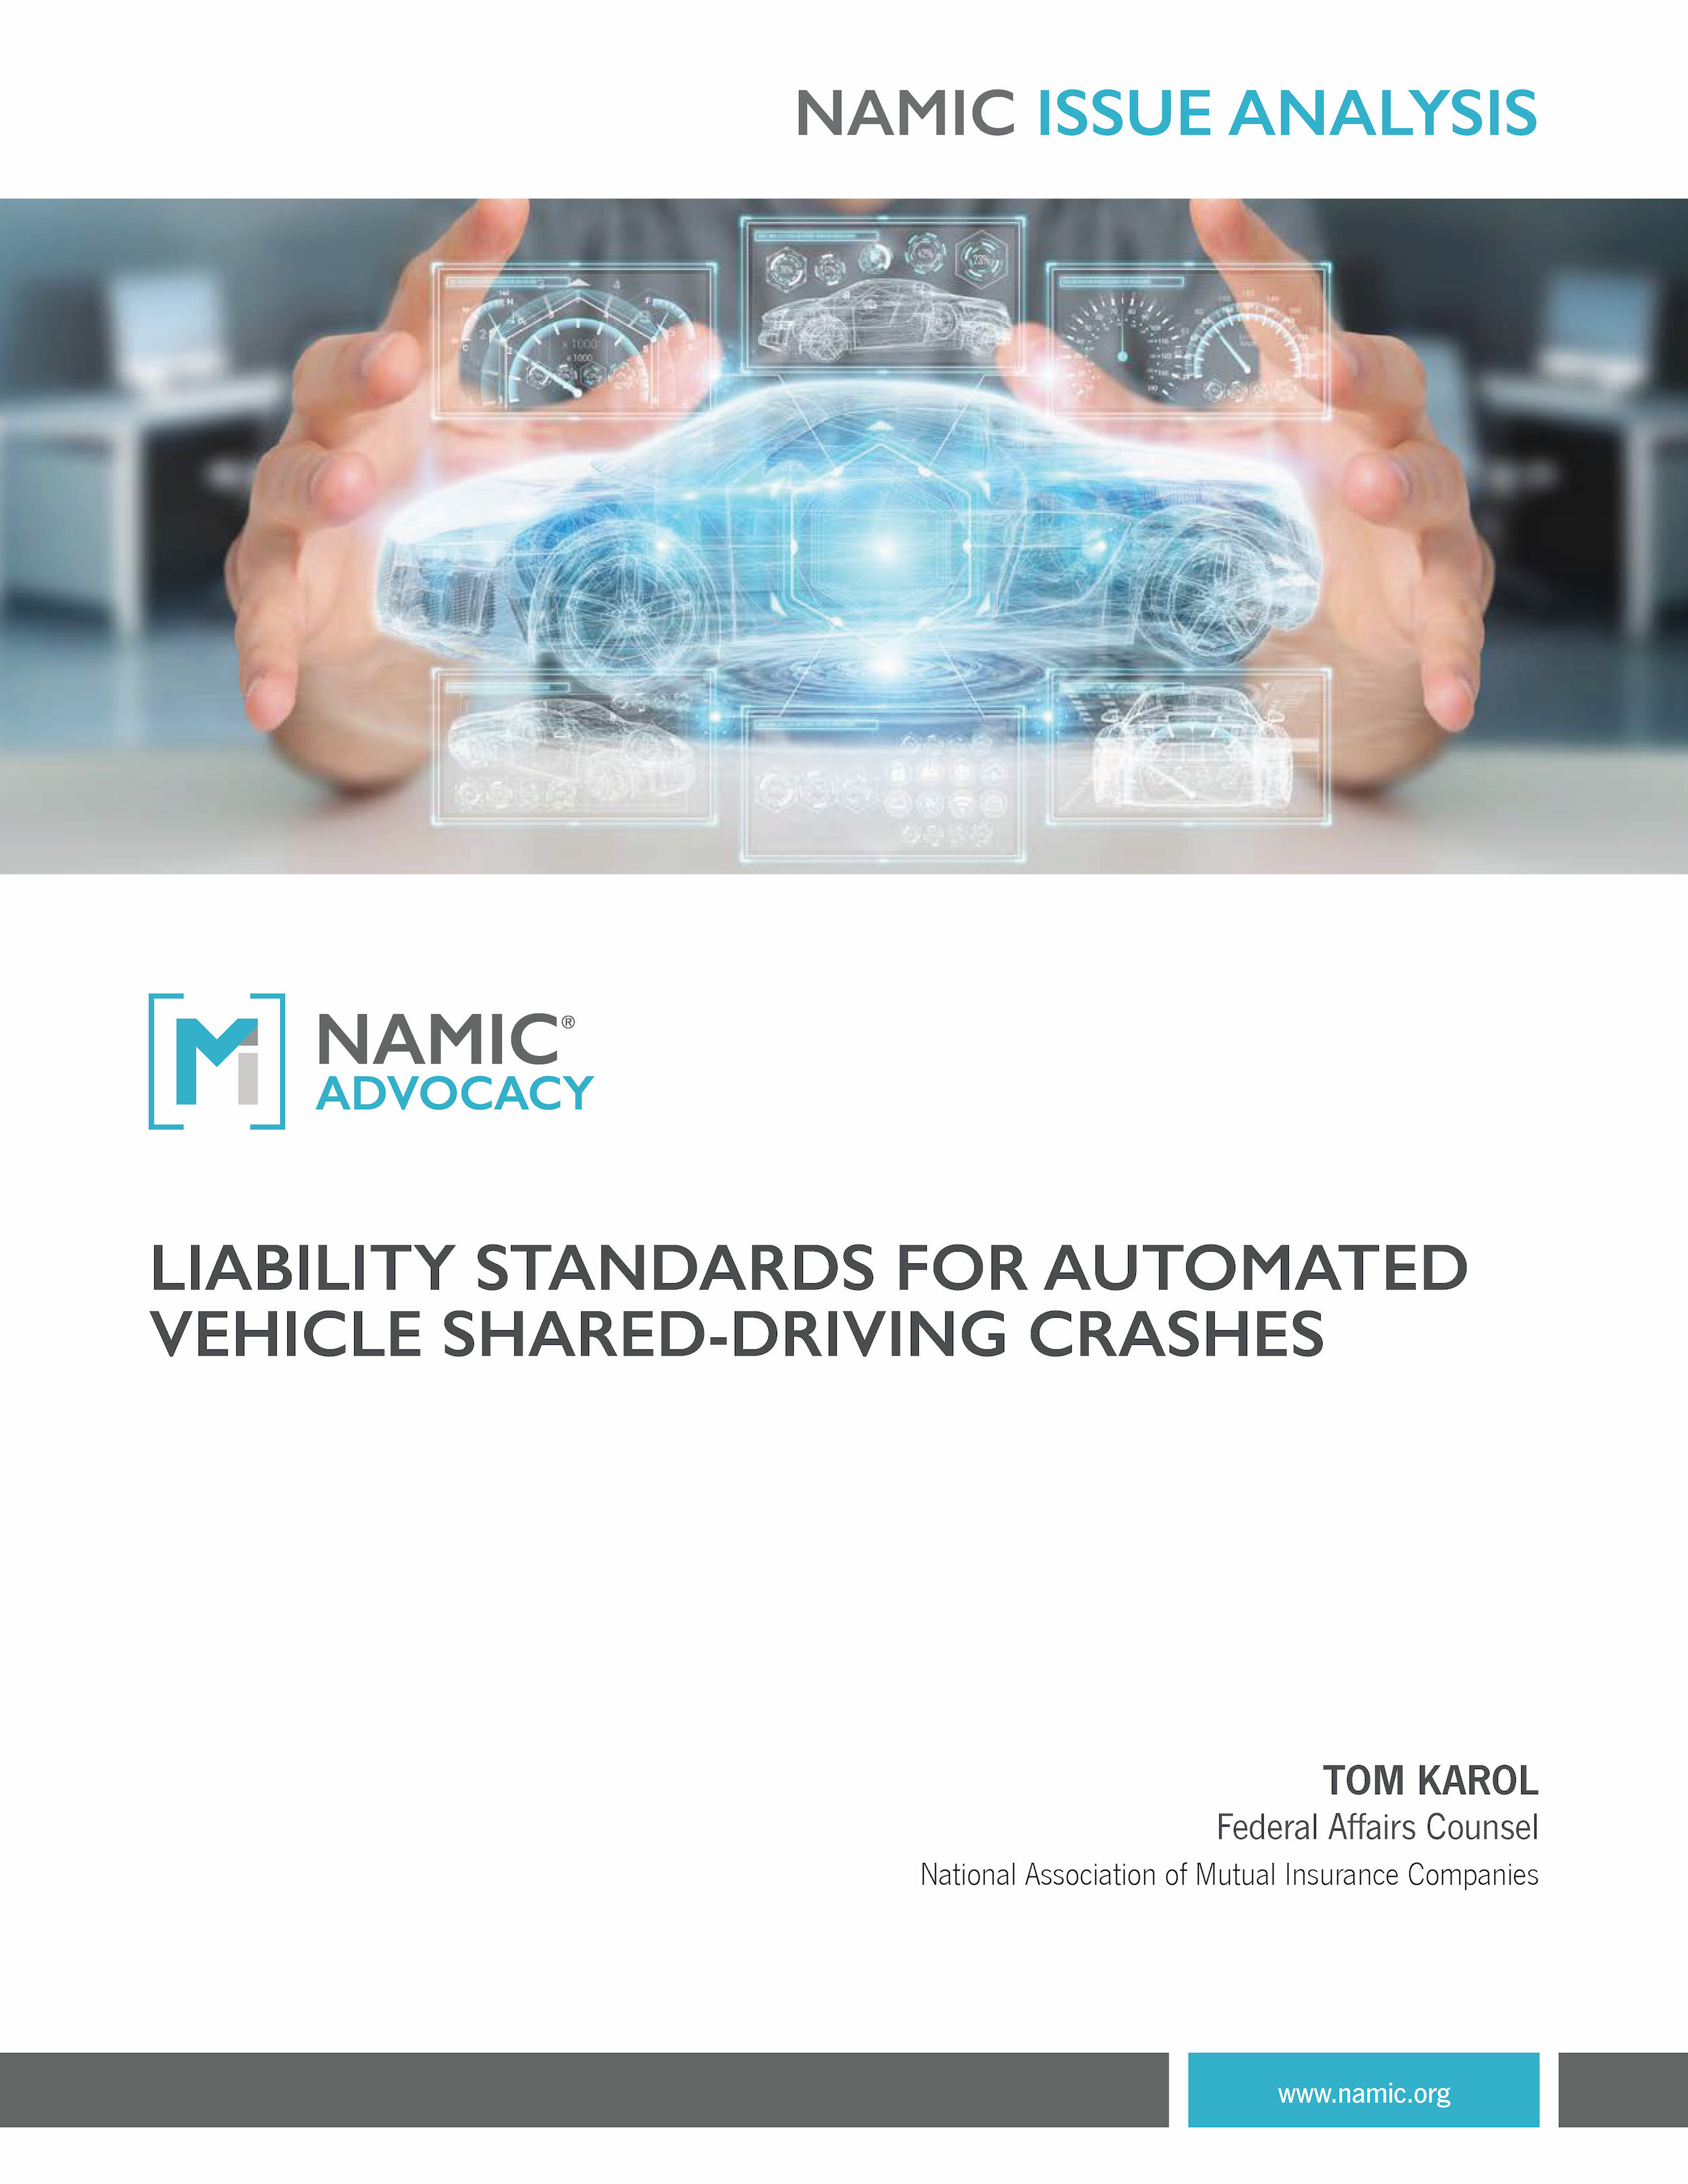 Liability Standards for Automated Vehicle Shared-Driving Crashes PDF